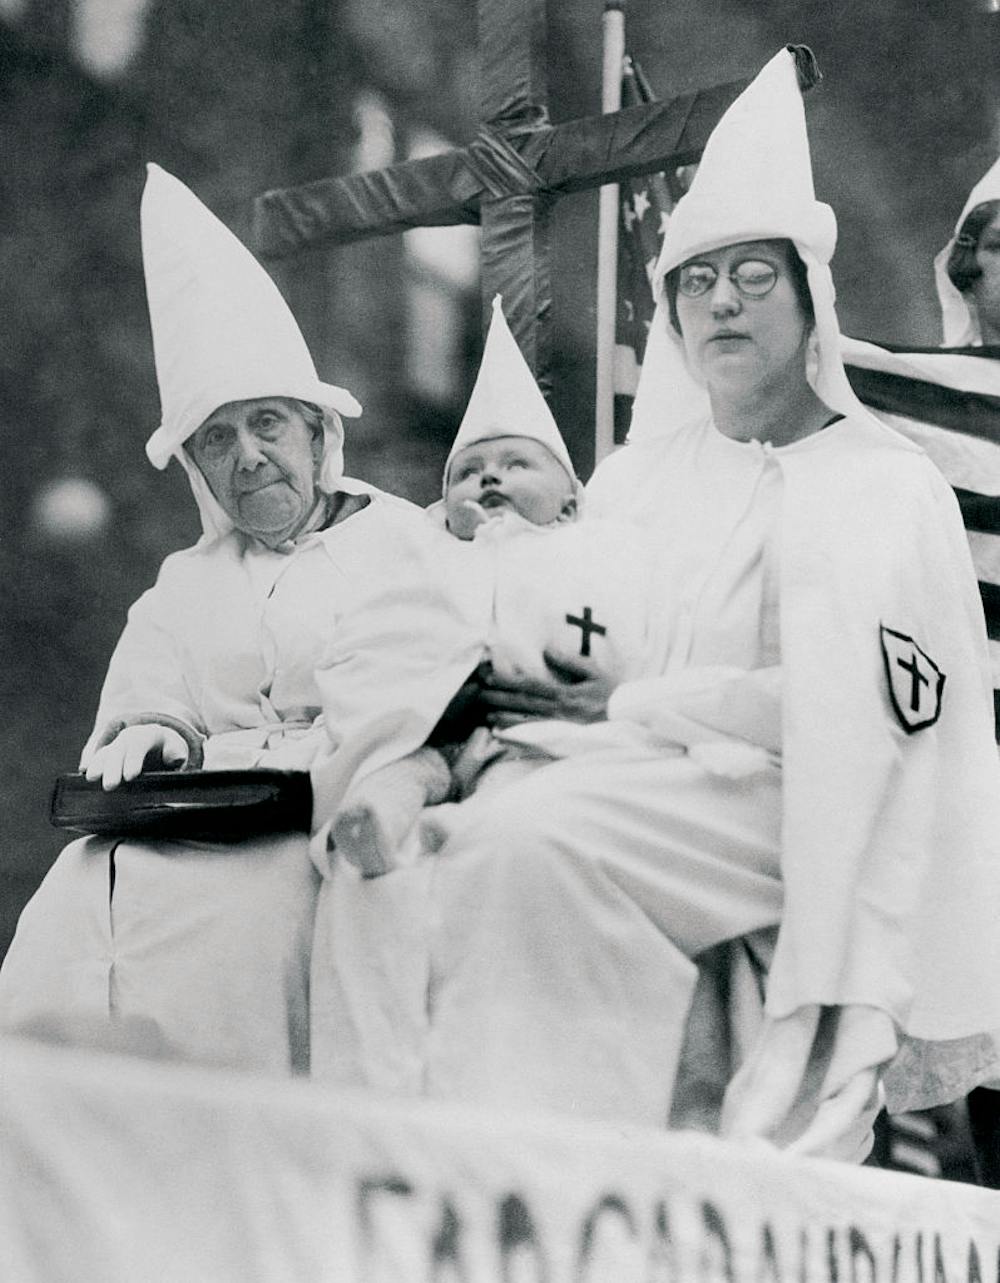 100 years ago, the KKK planted bombs at a US university – part of the  terror group's crusade against American Catholics